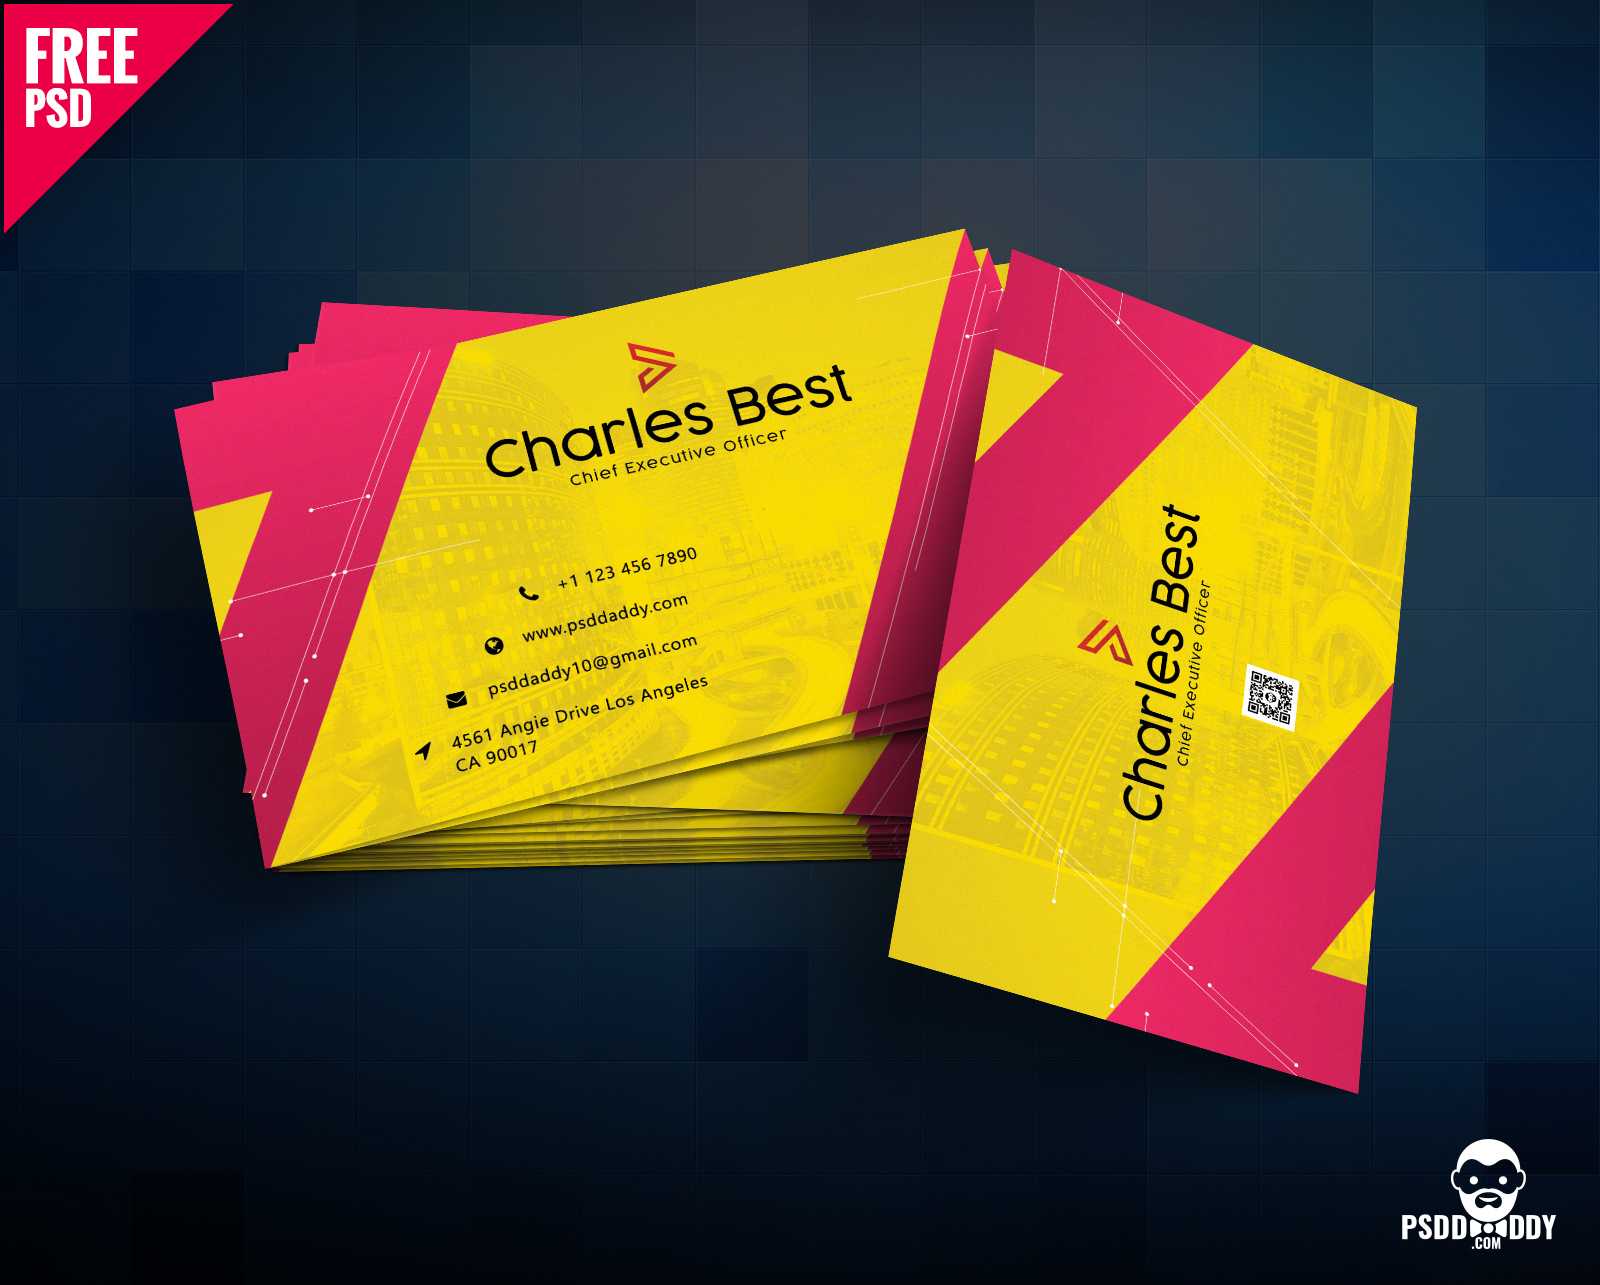 Download] Creative Business Card Free Psd | Psddaddy With Visiting Card Templates For Photoshop